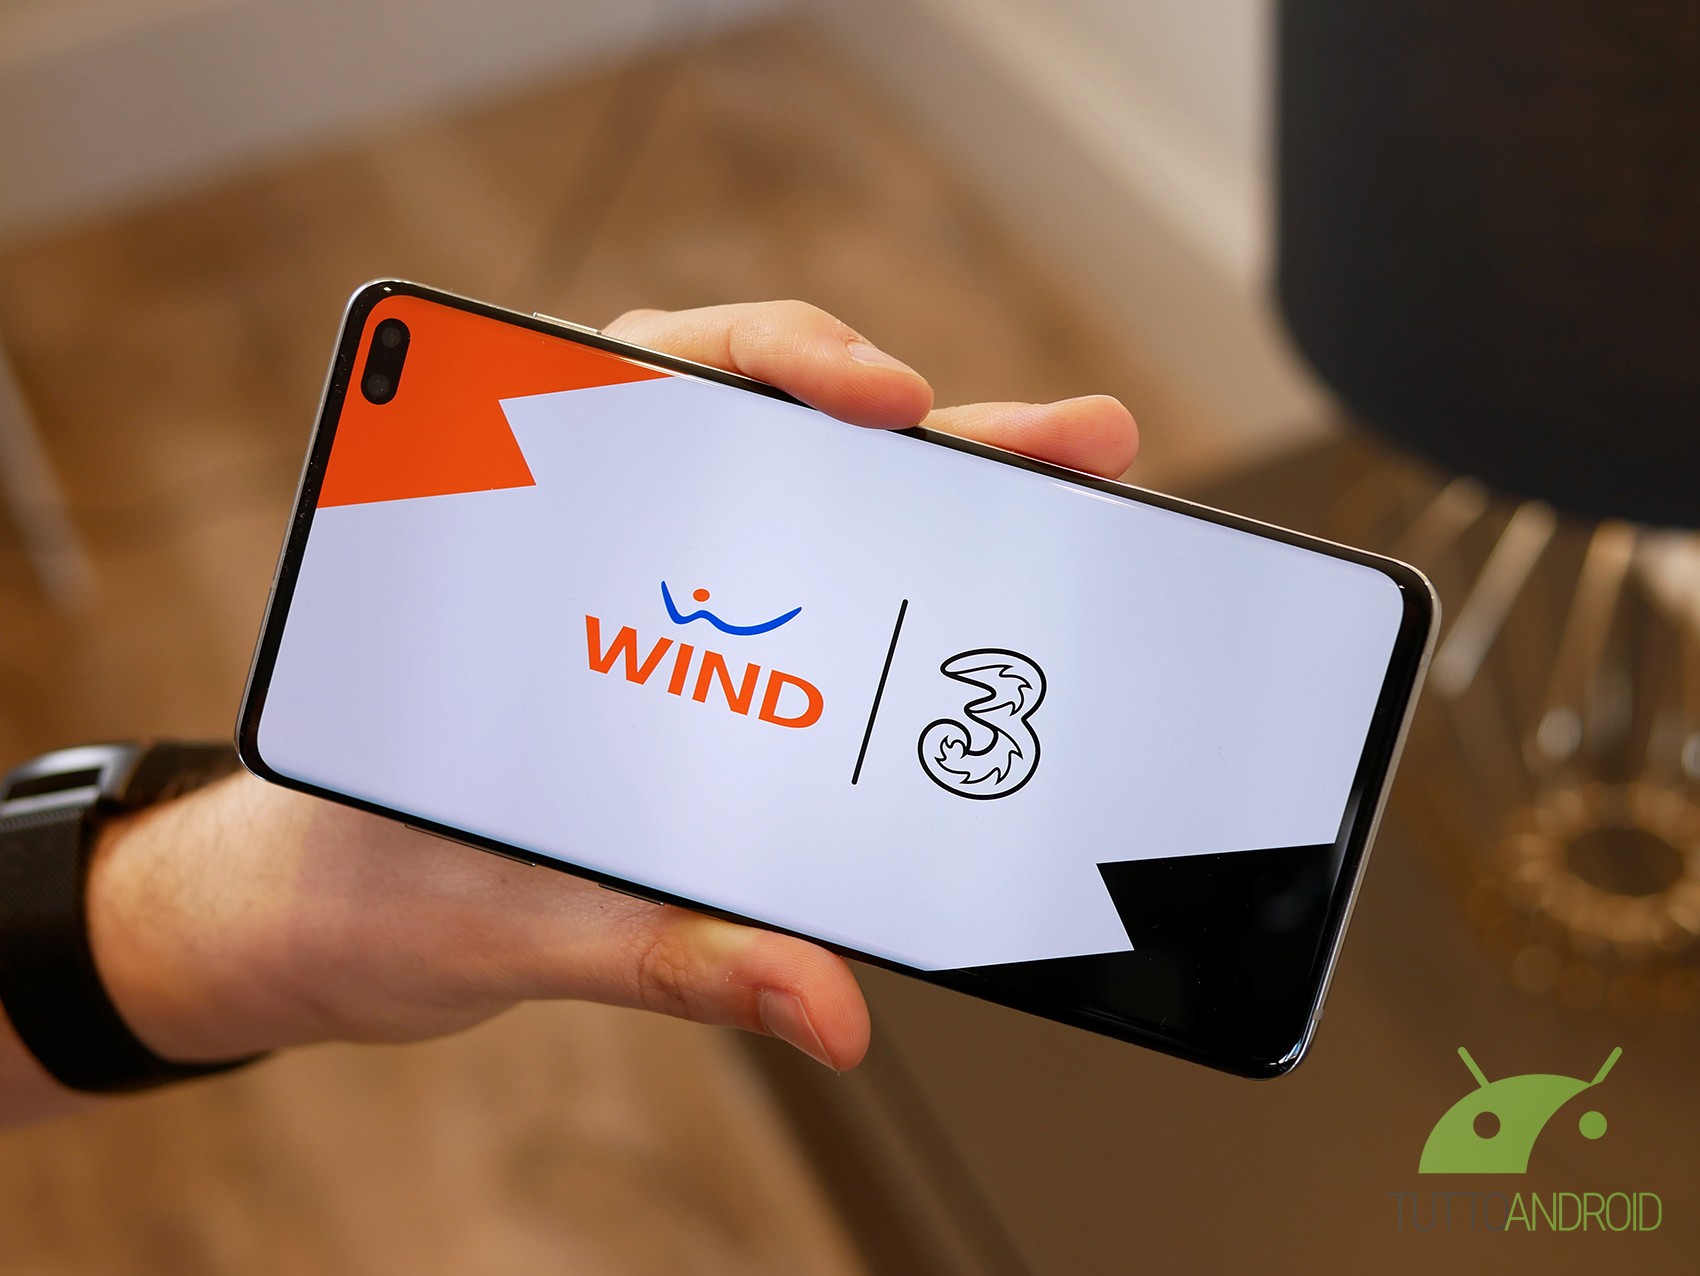 Wind Tray will not work for mobile and fixed networks from 29th to 30th April